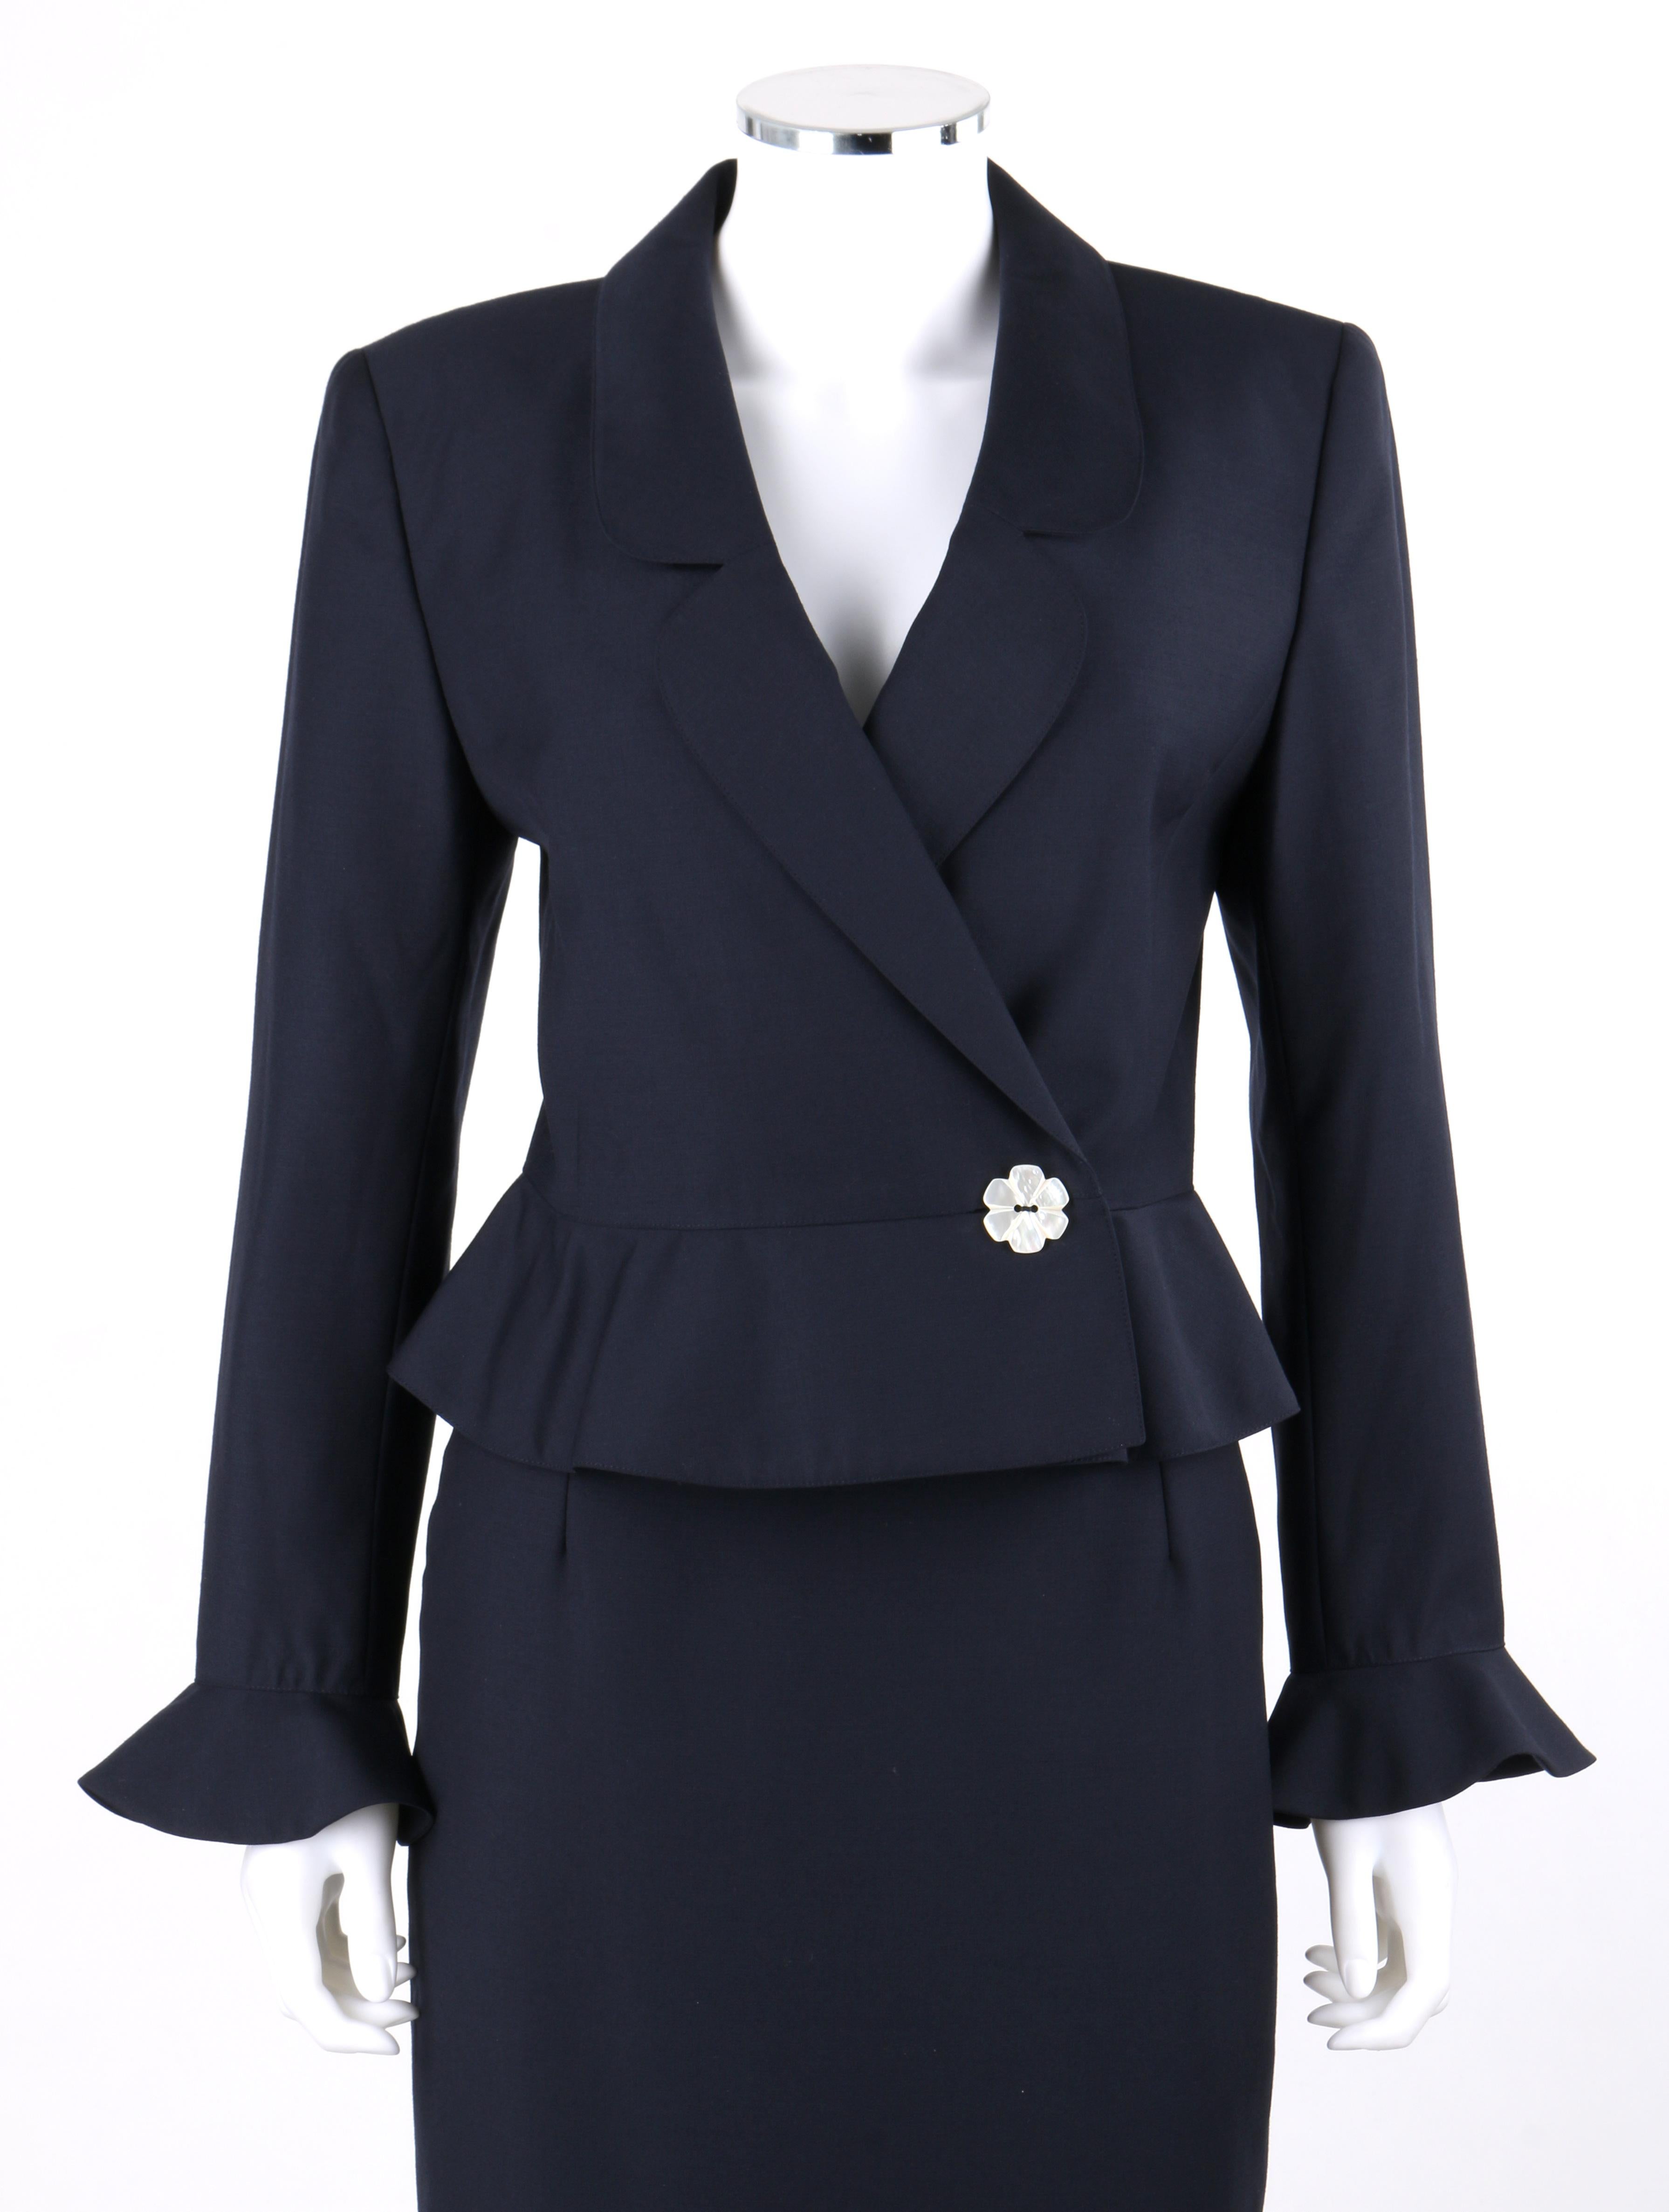 DESCRIPTION: VALENTINO Miss V c.1990's 2 Pc Navy Blue Peplum Blazer Jacket Skirt Suit Set 
 
Circa: c.1990’s
Label(s): Valentino Miss V
Designer: Valentino Garavani
Style: Skirt suit
Color(s): Navy blue
Lined: Yes
Marked Fabric Content: Cloth: 100%